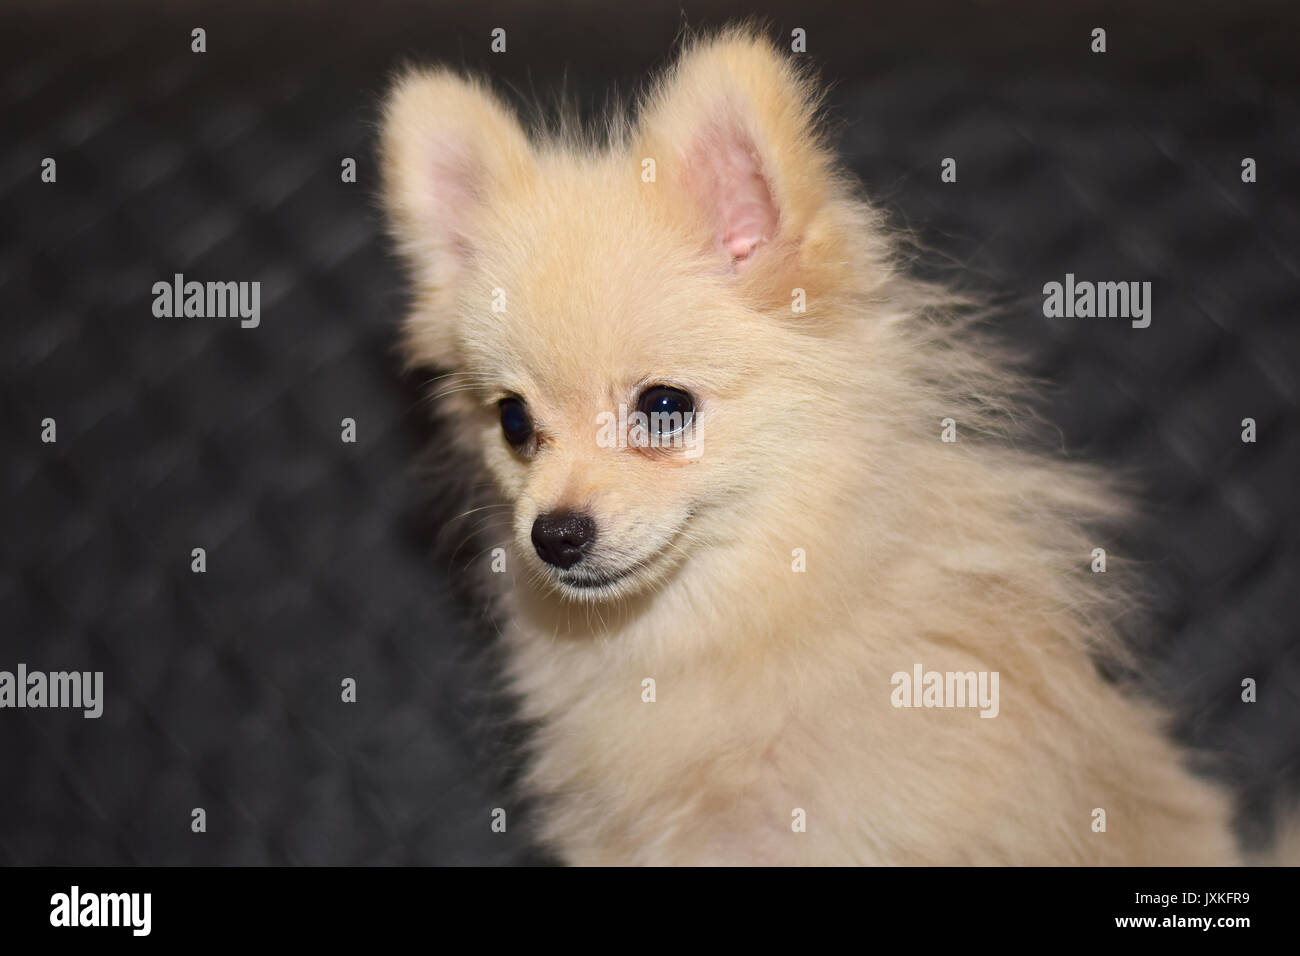 Pom Pom The Dog High Resolution Stock Photography and Images - Alamy